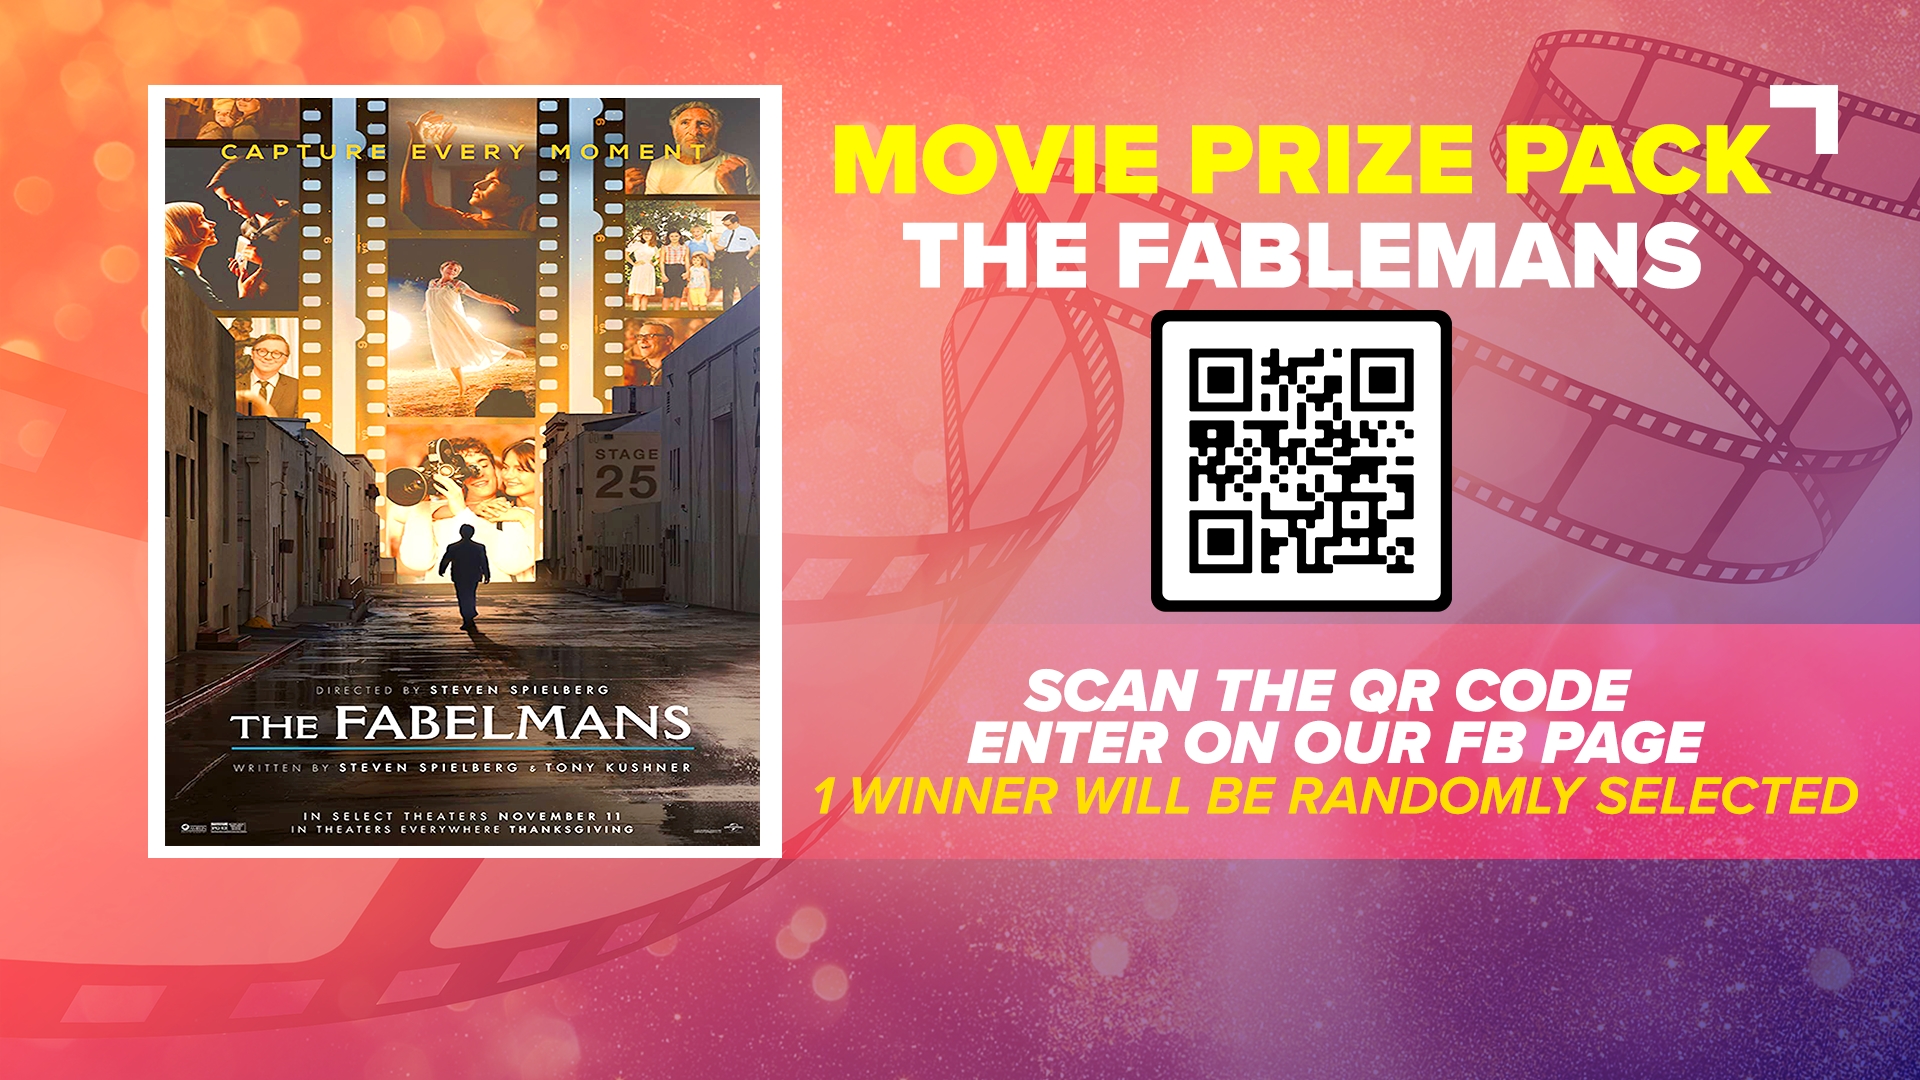 The Fabelmans Movie Prize Pack Giveaway!